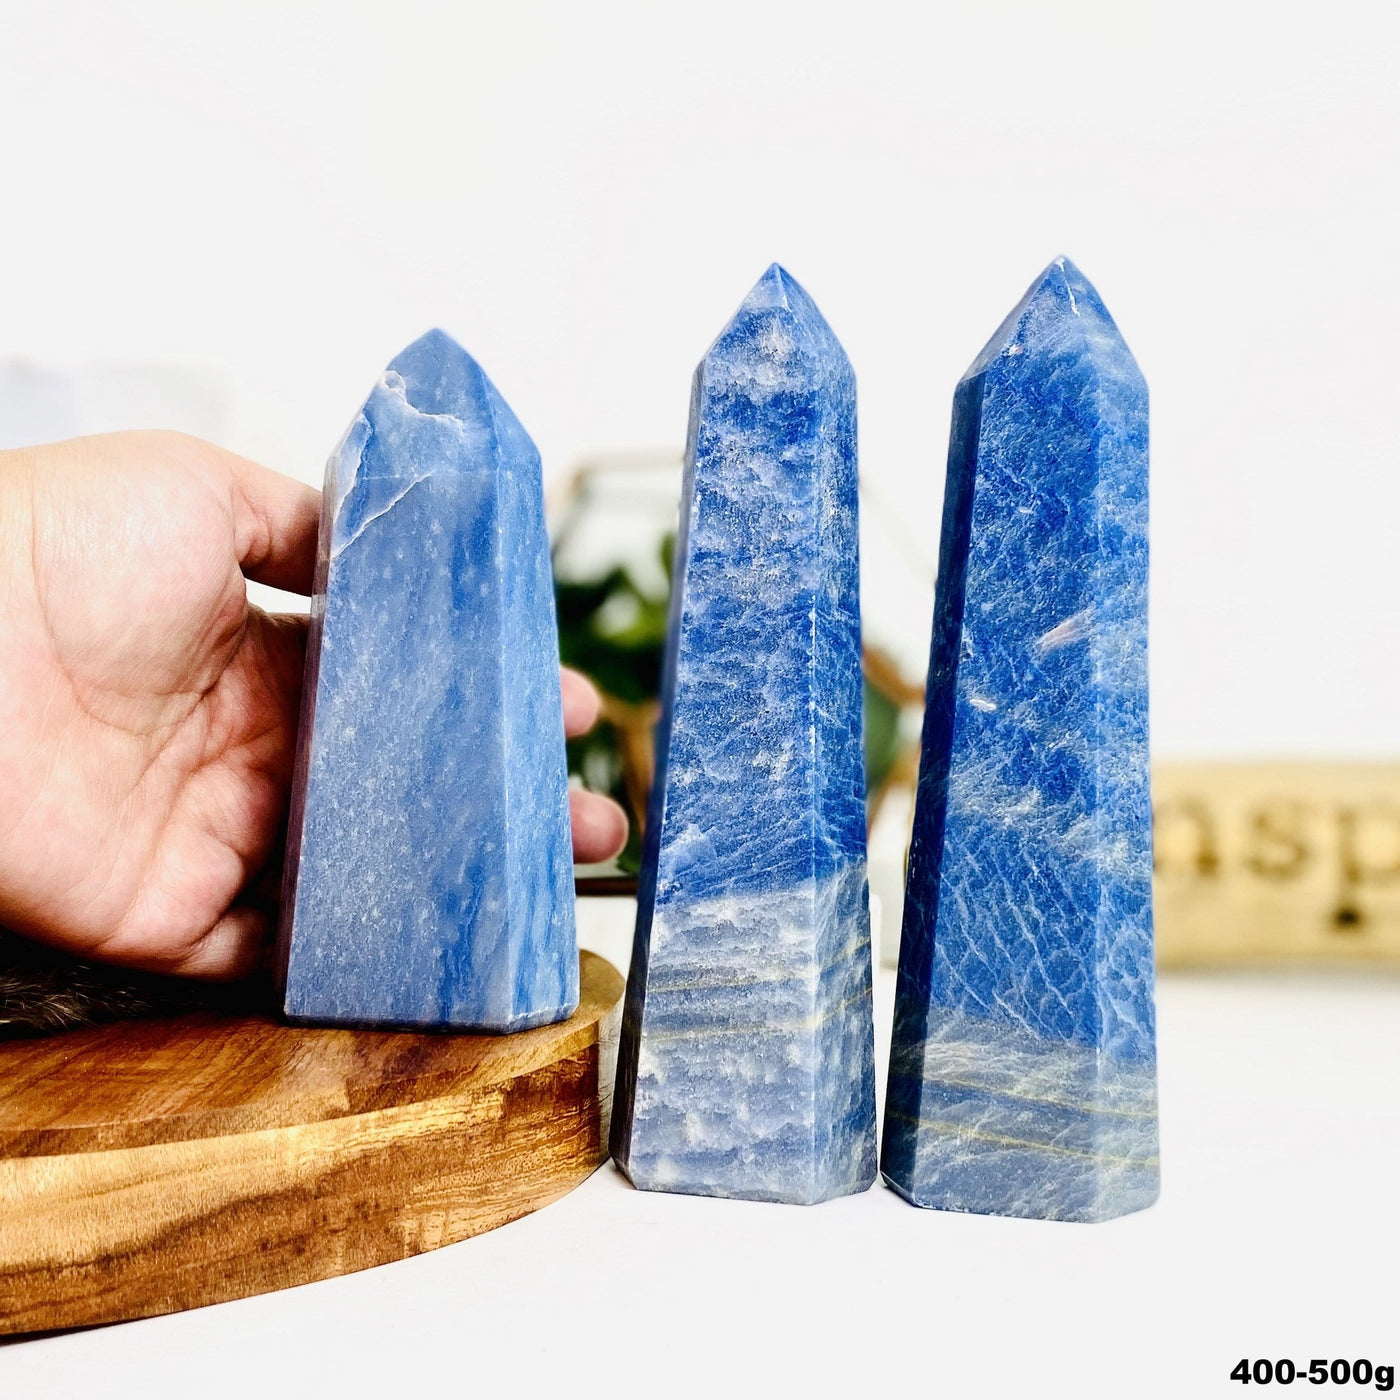 Three Blue Quartz Tower Points weighing at 400-500g in a variety of sizes